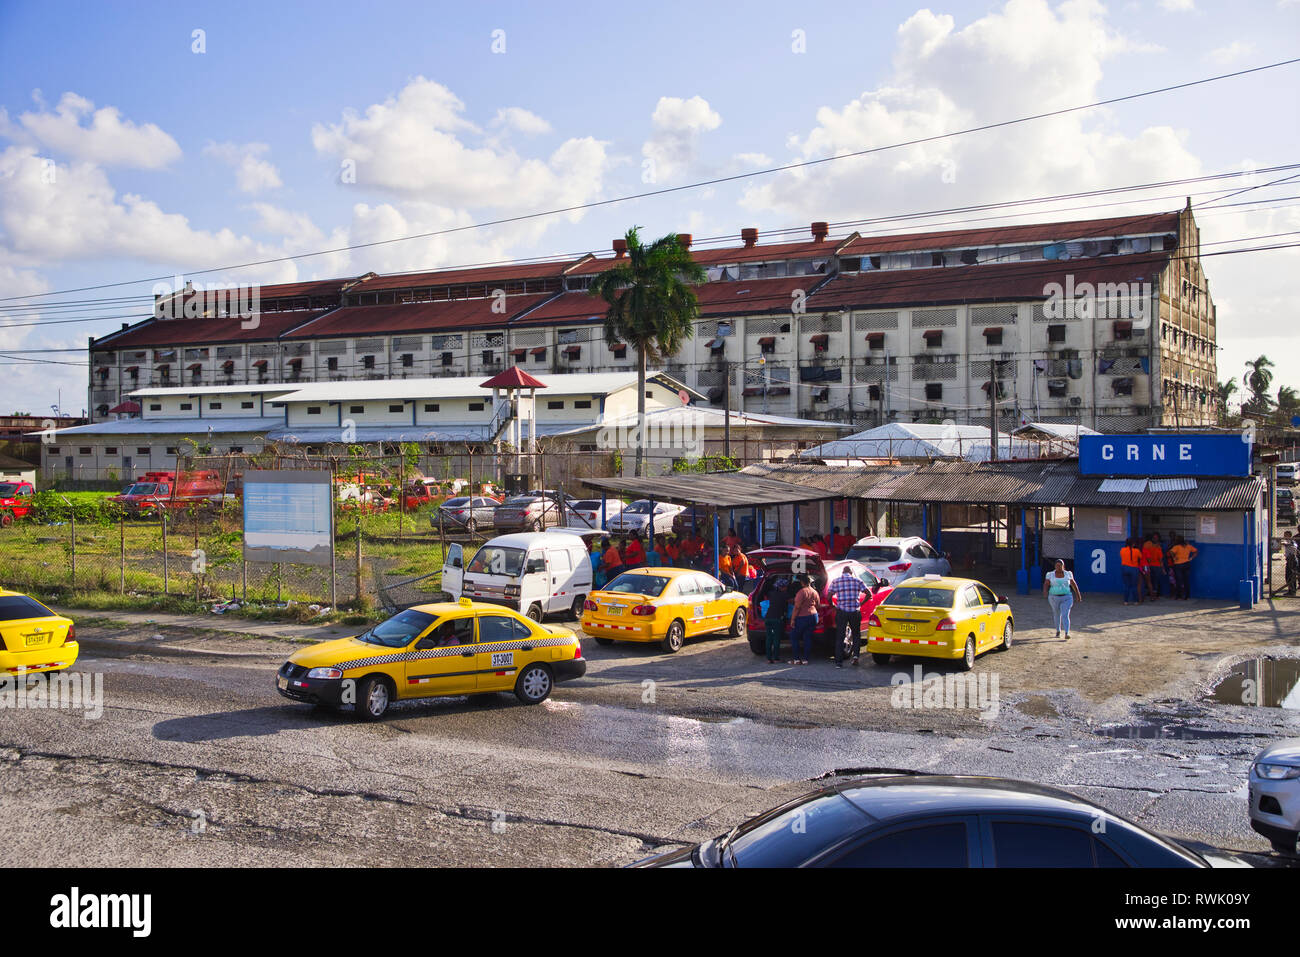 Main prison as seen from the train in Colon, Panama Stock Photo